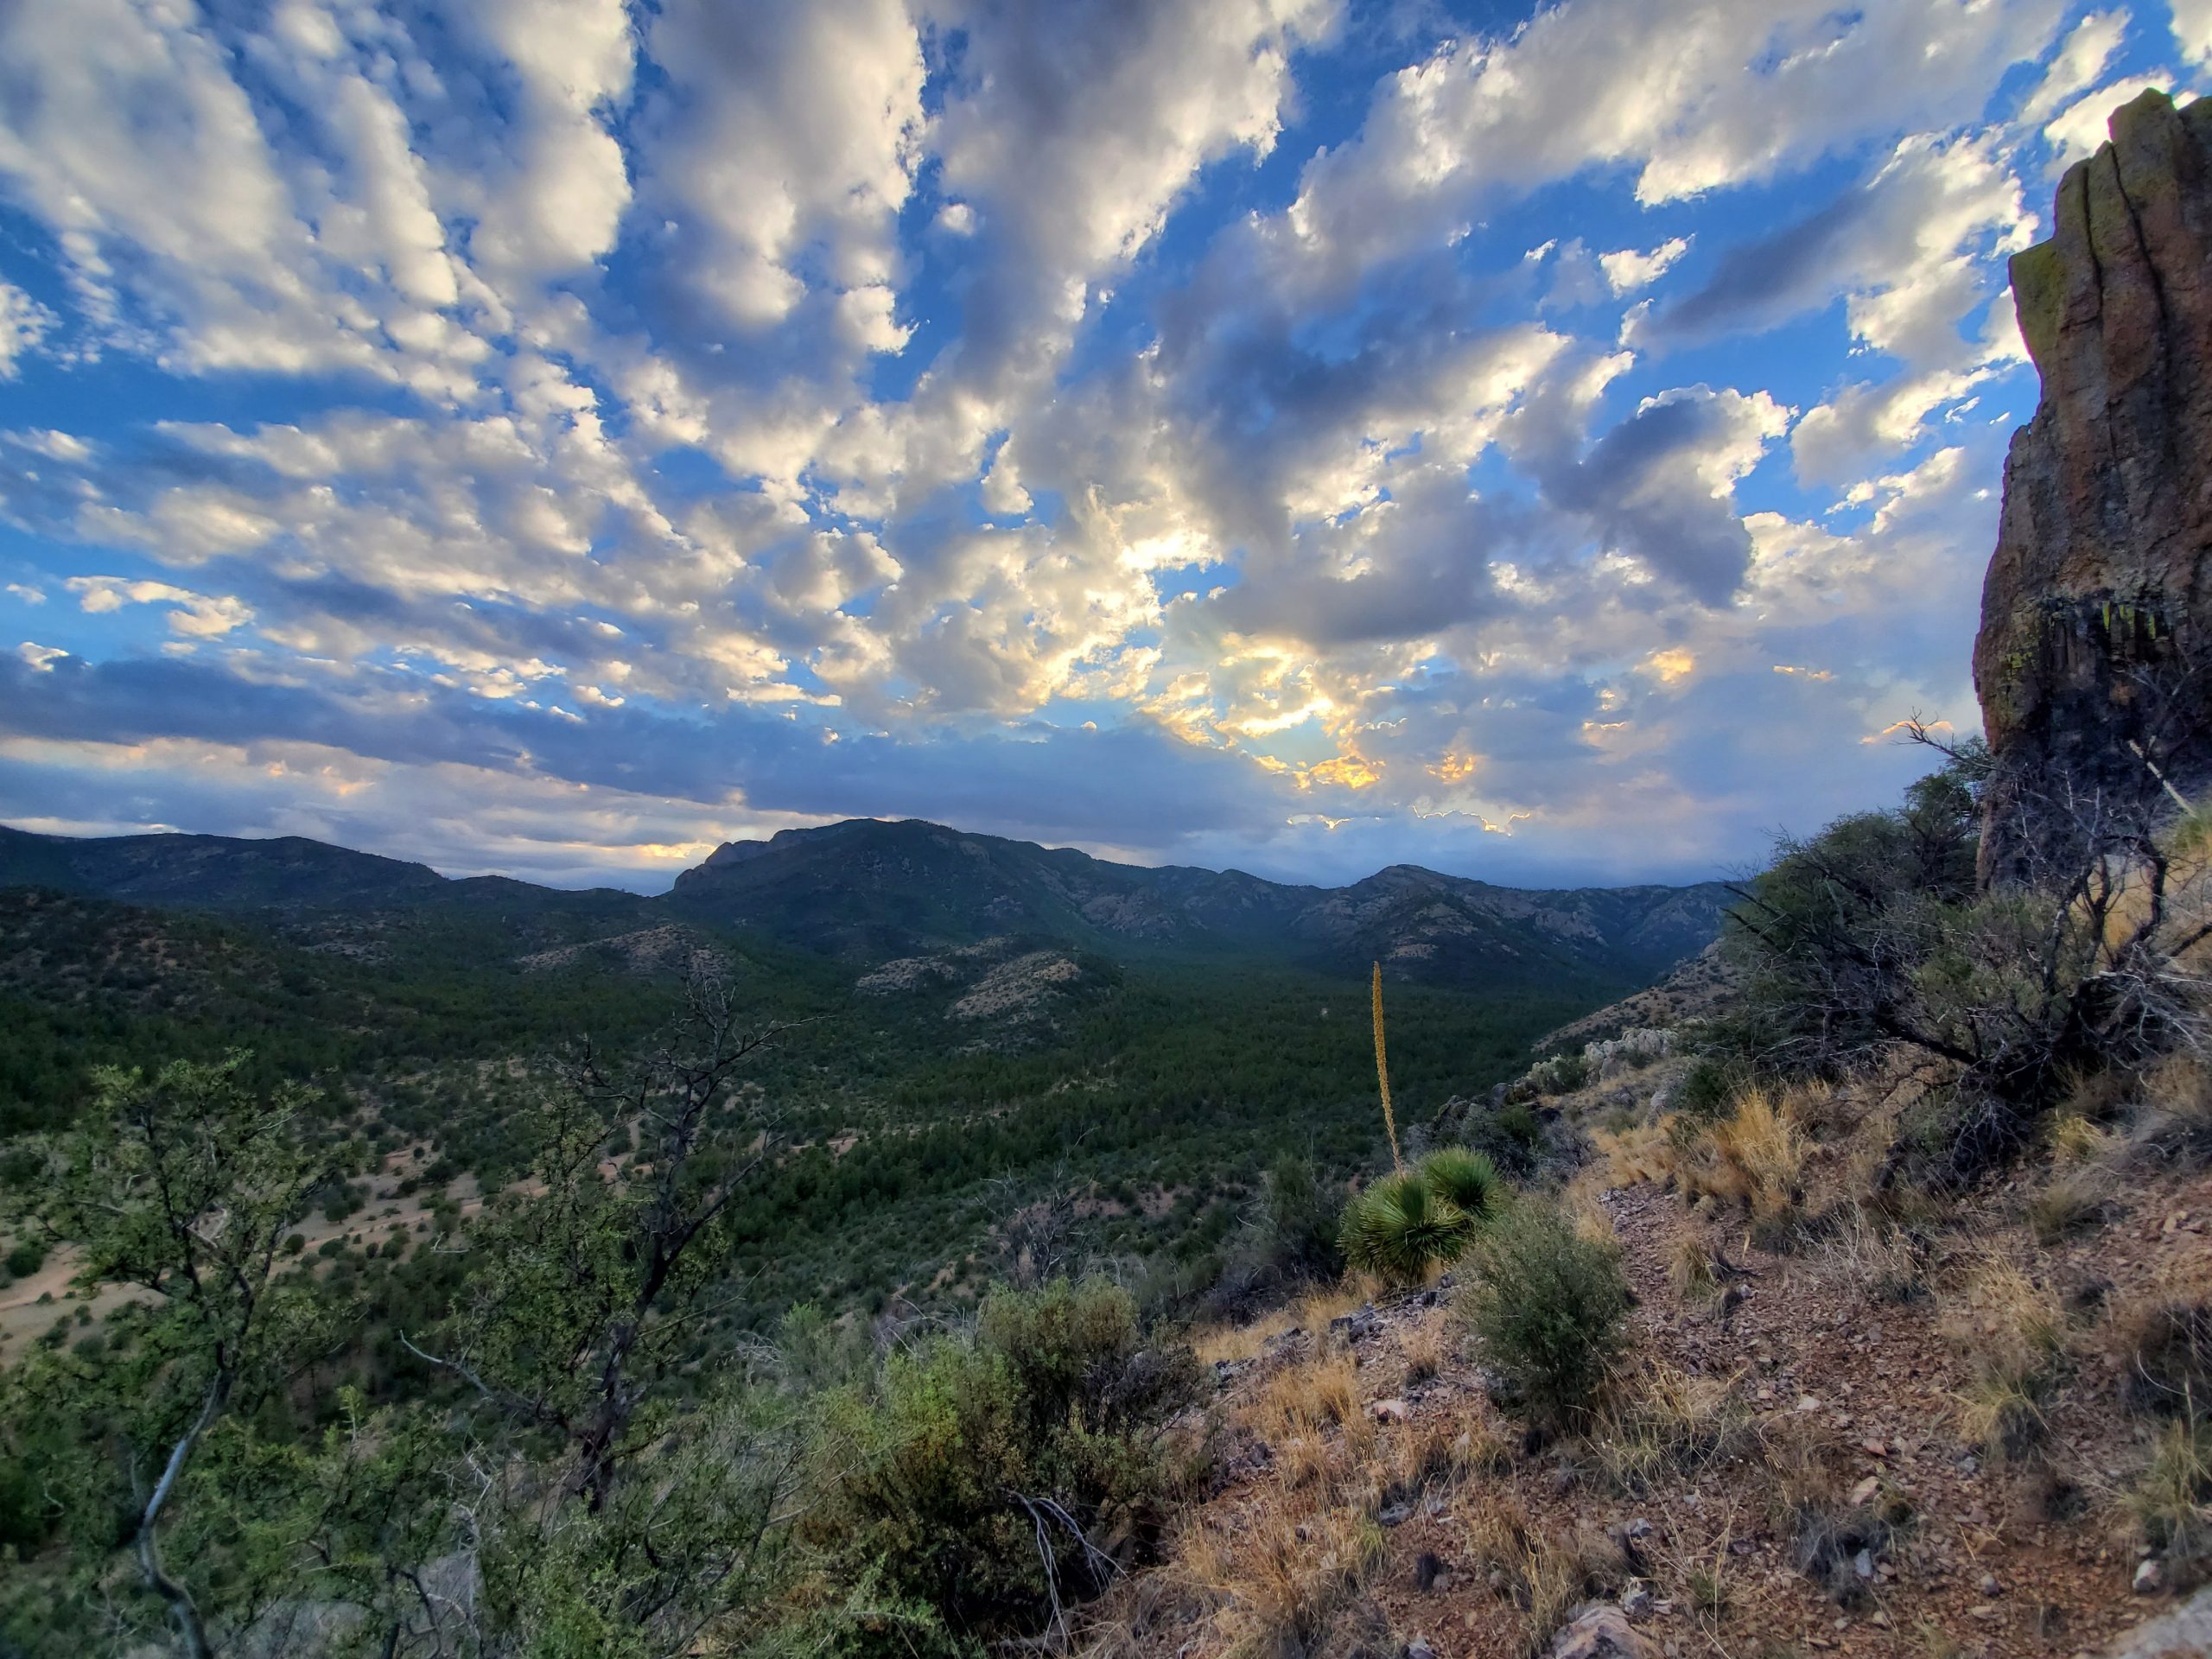 Carson, Cibola, and Santa Fe National Forests Miss Critical Opportunity to Prioritize Conservation in Updated Land Management Plans 